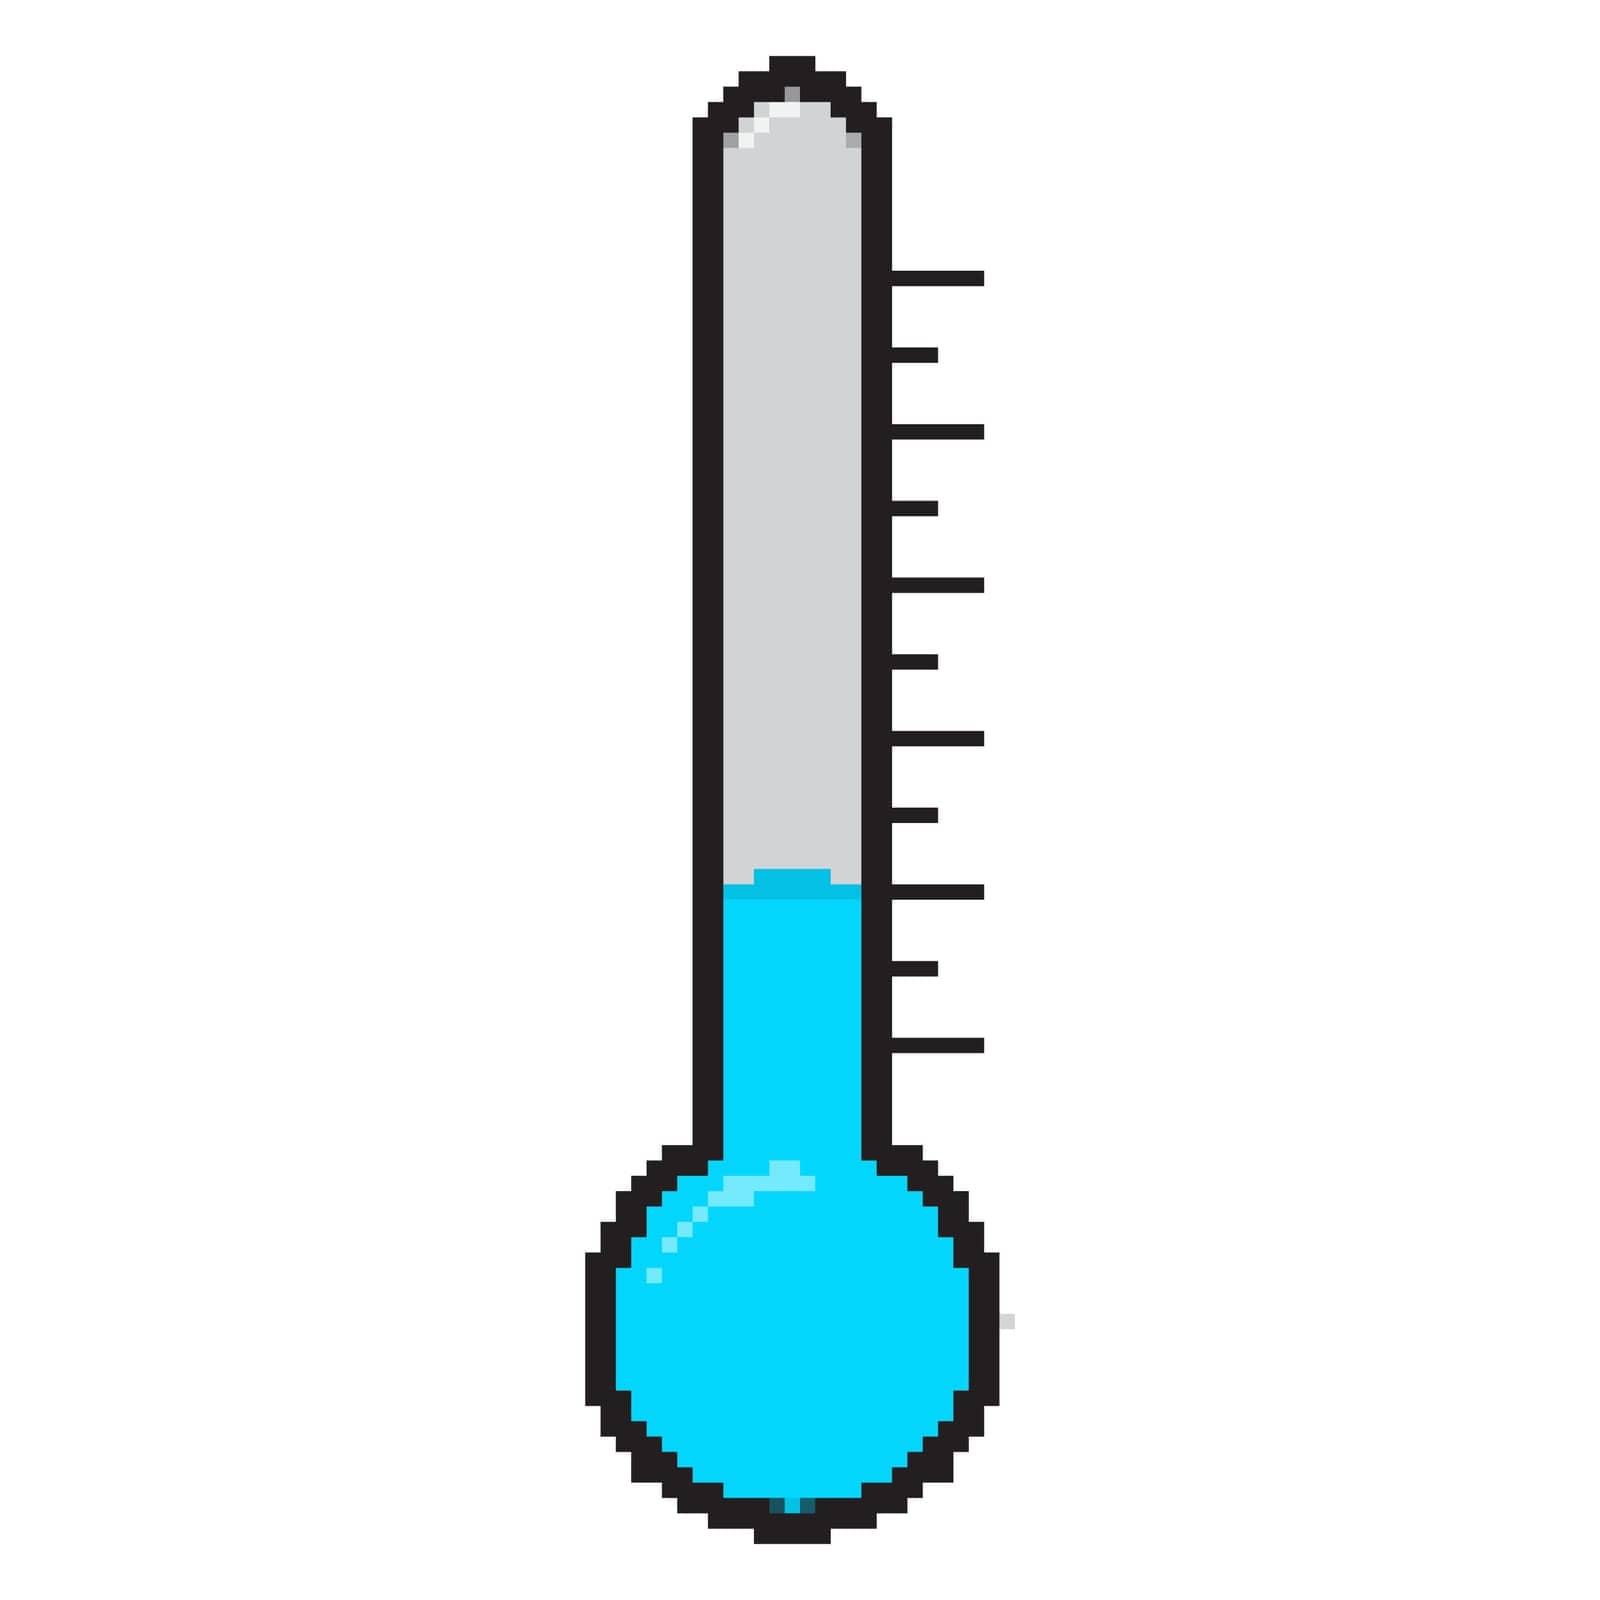 Thermometer icon. Vector illustration.Pixel art design of Thermometer icon. Vector illustration. Color thermometer icon isolated